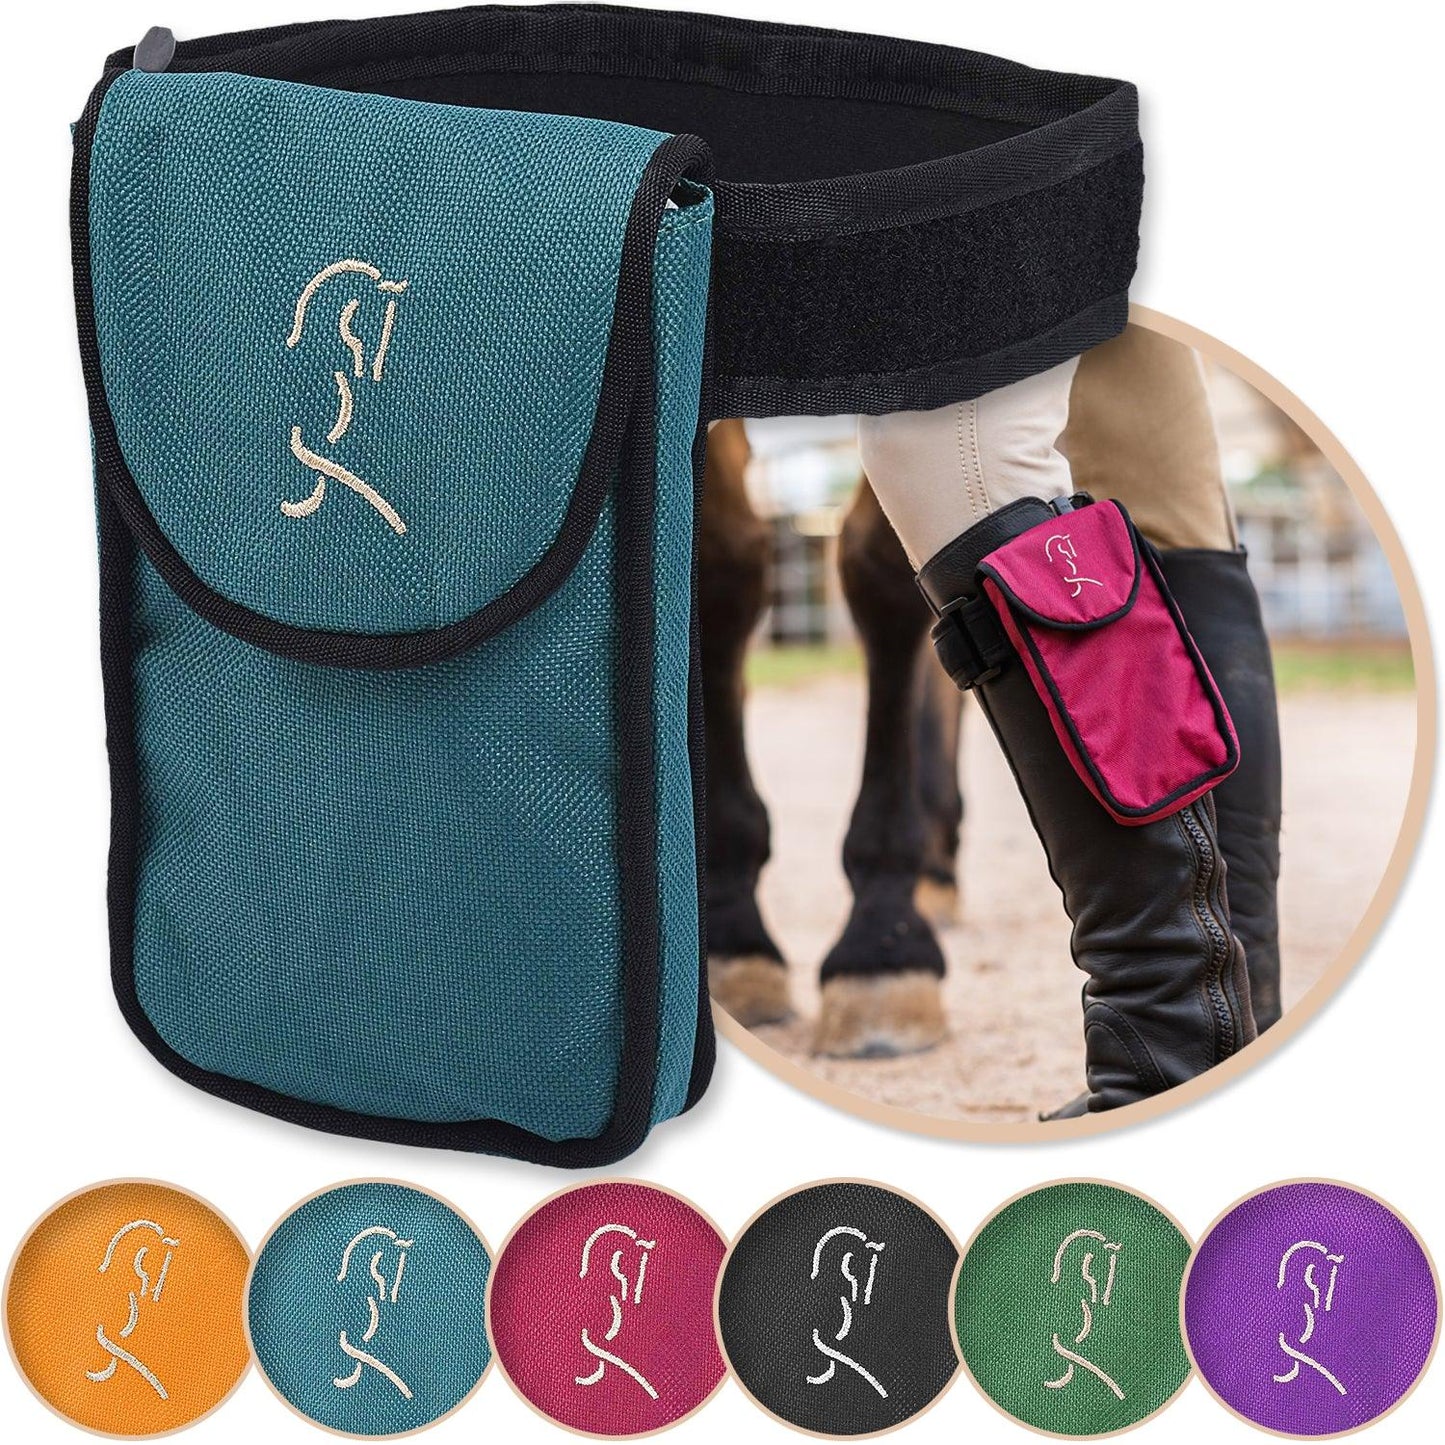 Teal equestrian cell phone holder shown with a variety of colors